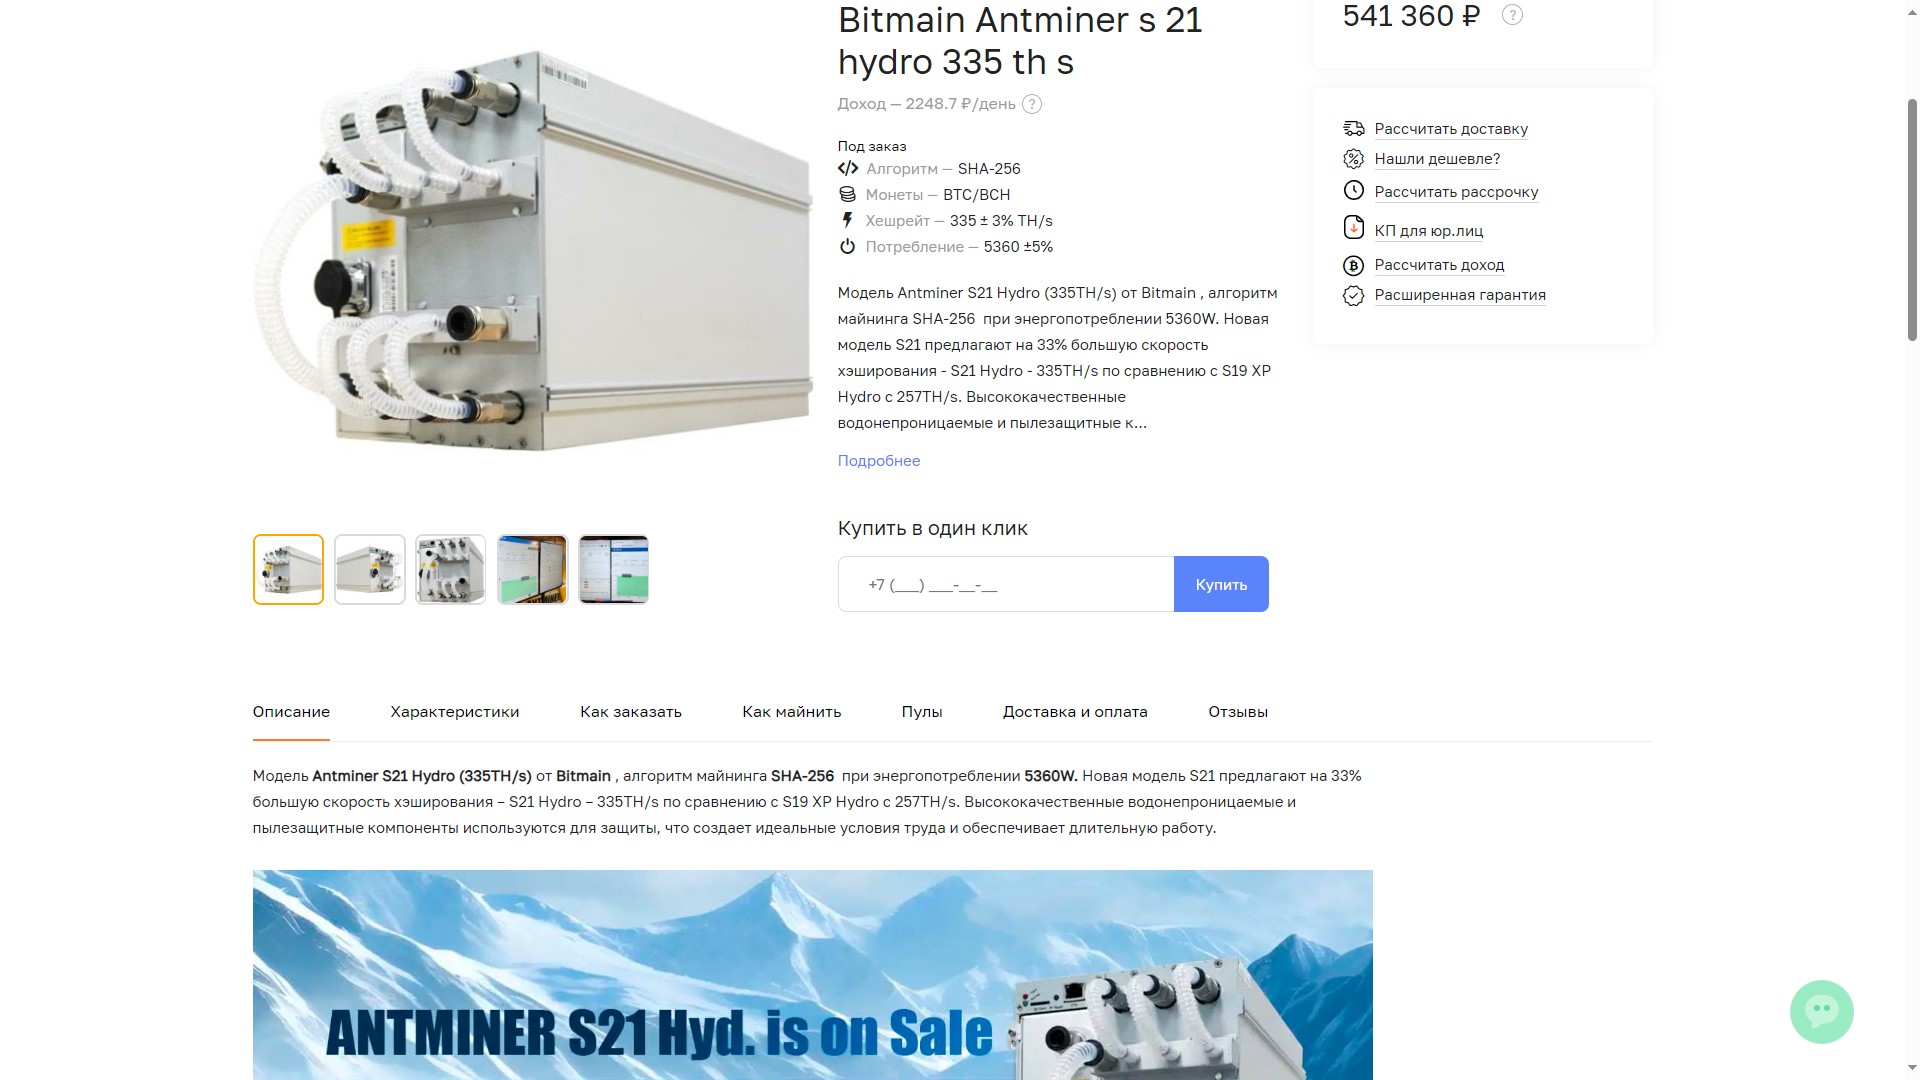 Antminer s21 hydro 335 th s